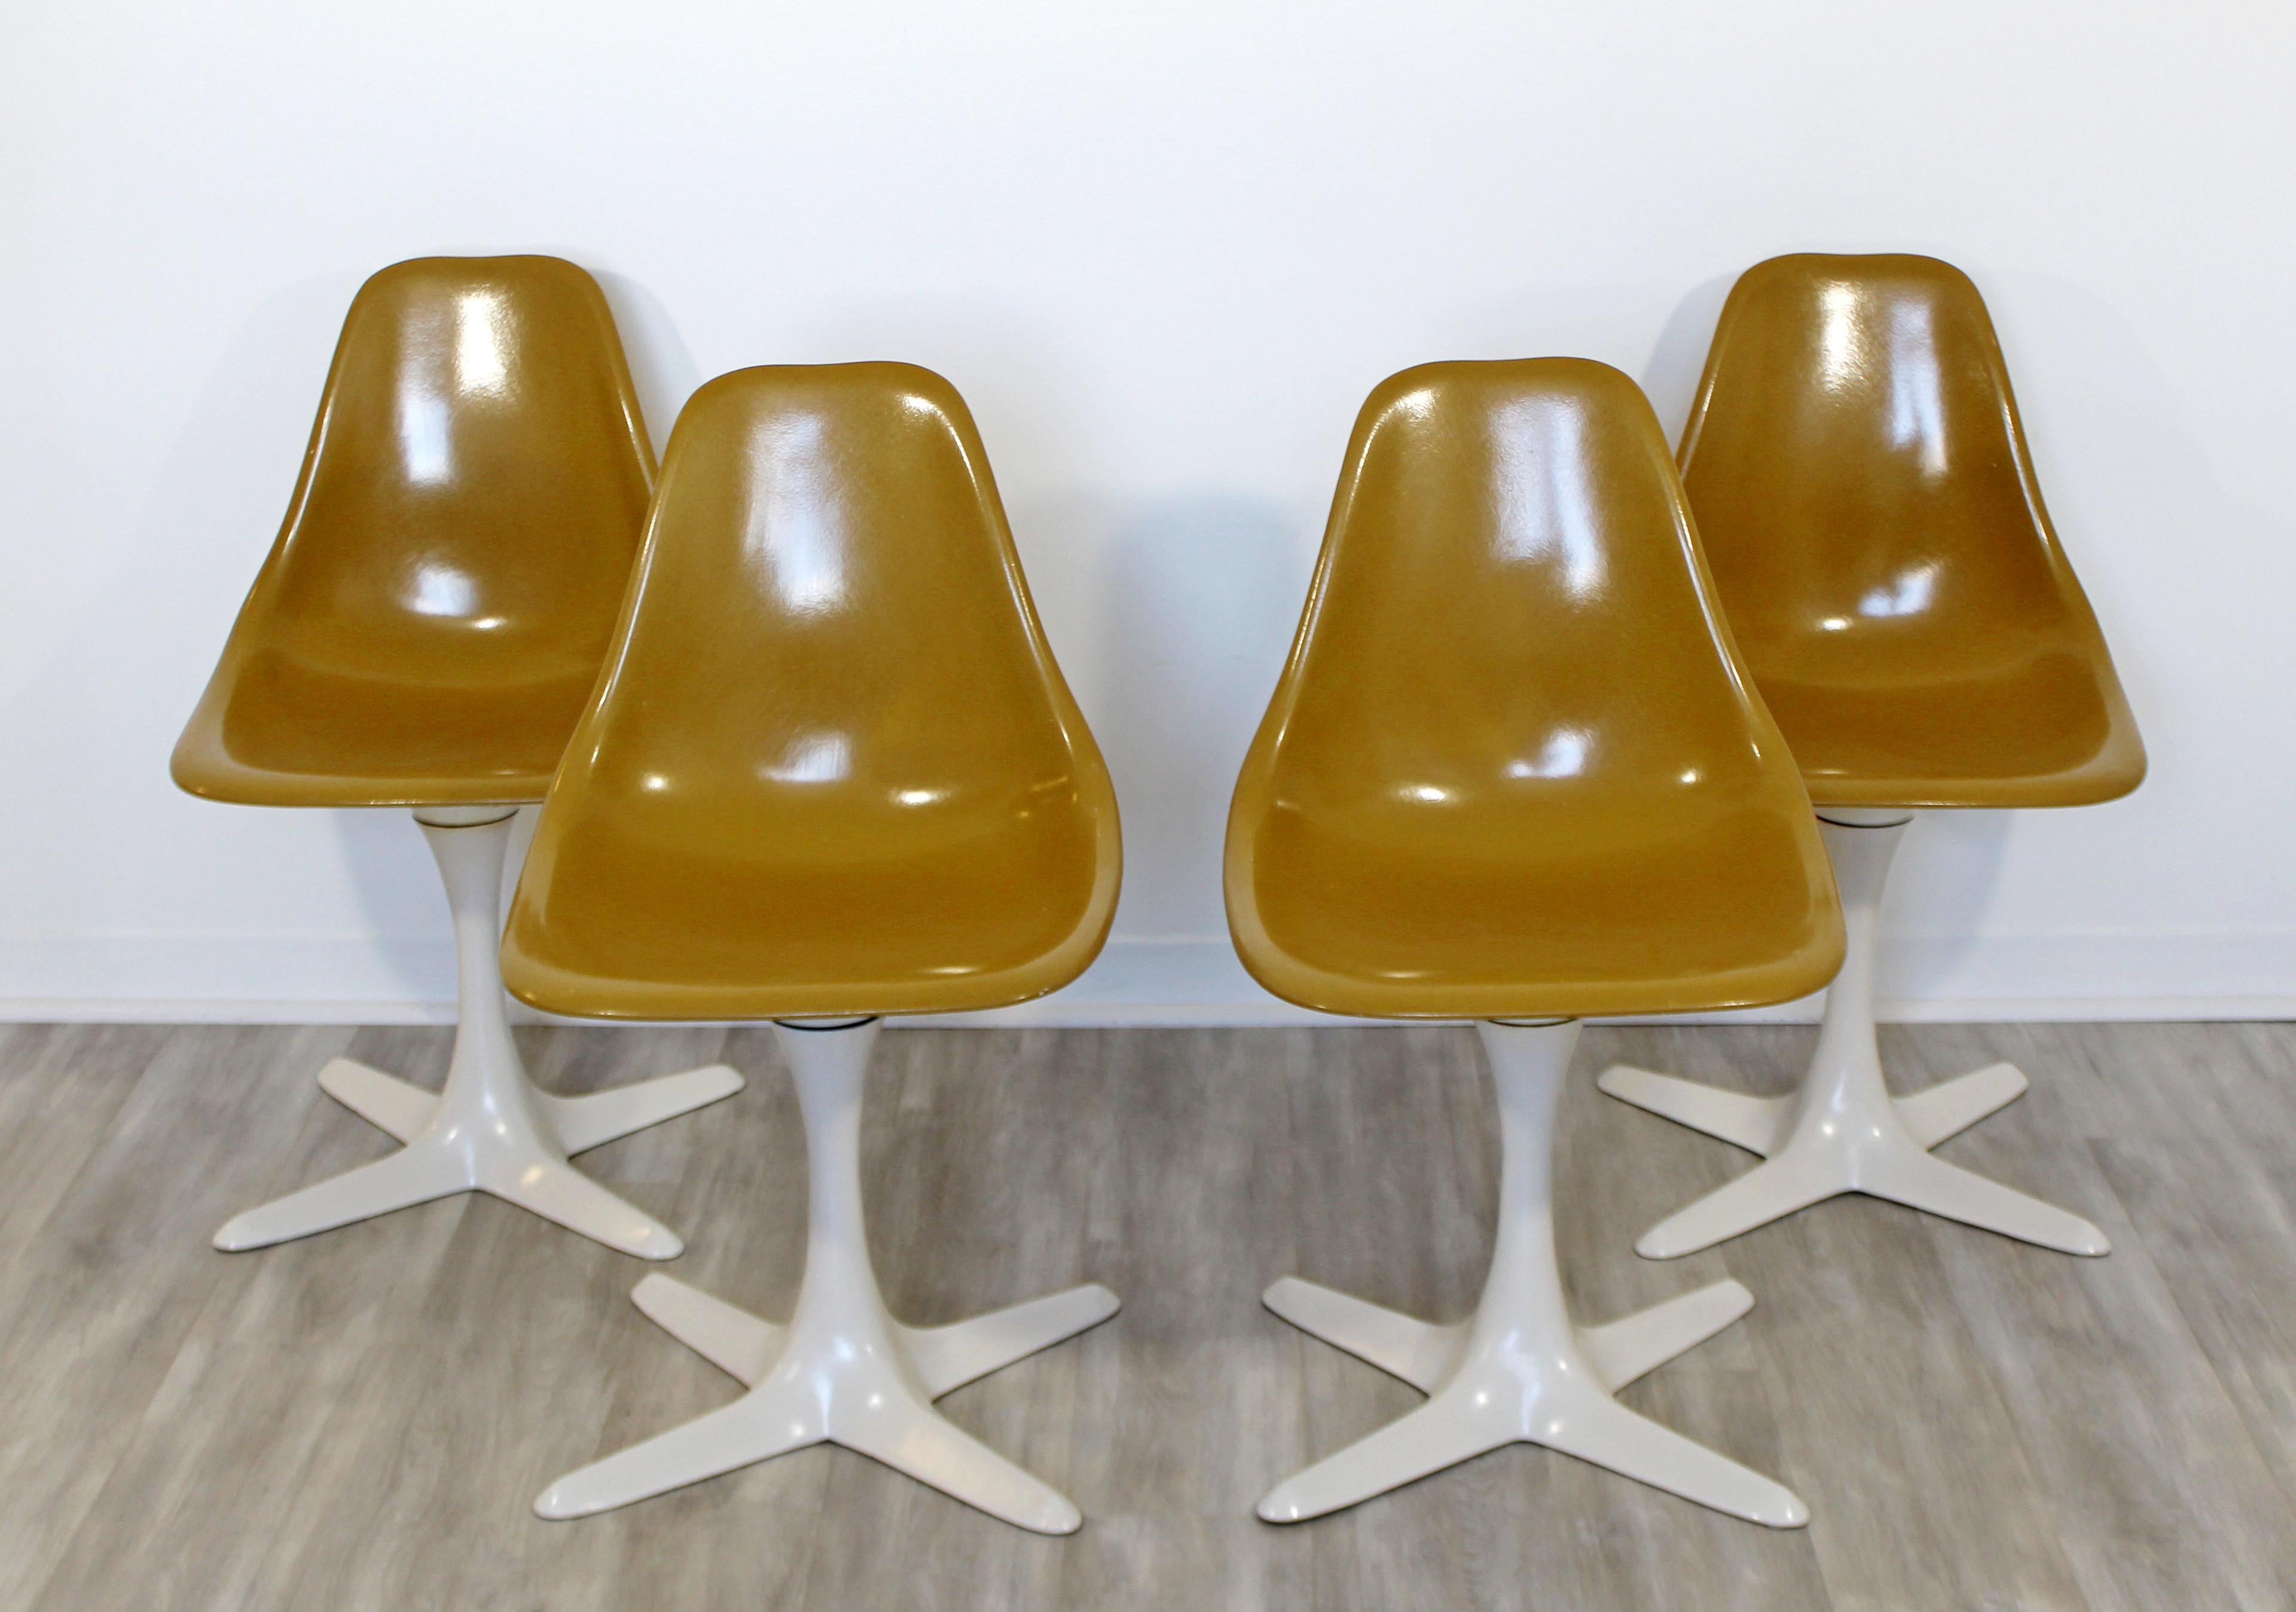 For your consideration is a chic and Classic, set of four Tulip propeller side dining chairs, with brown shell seats, by Burke, circa the 1960s. In very good vintage condition. The dimensions are 18